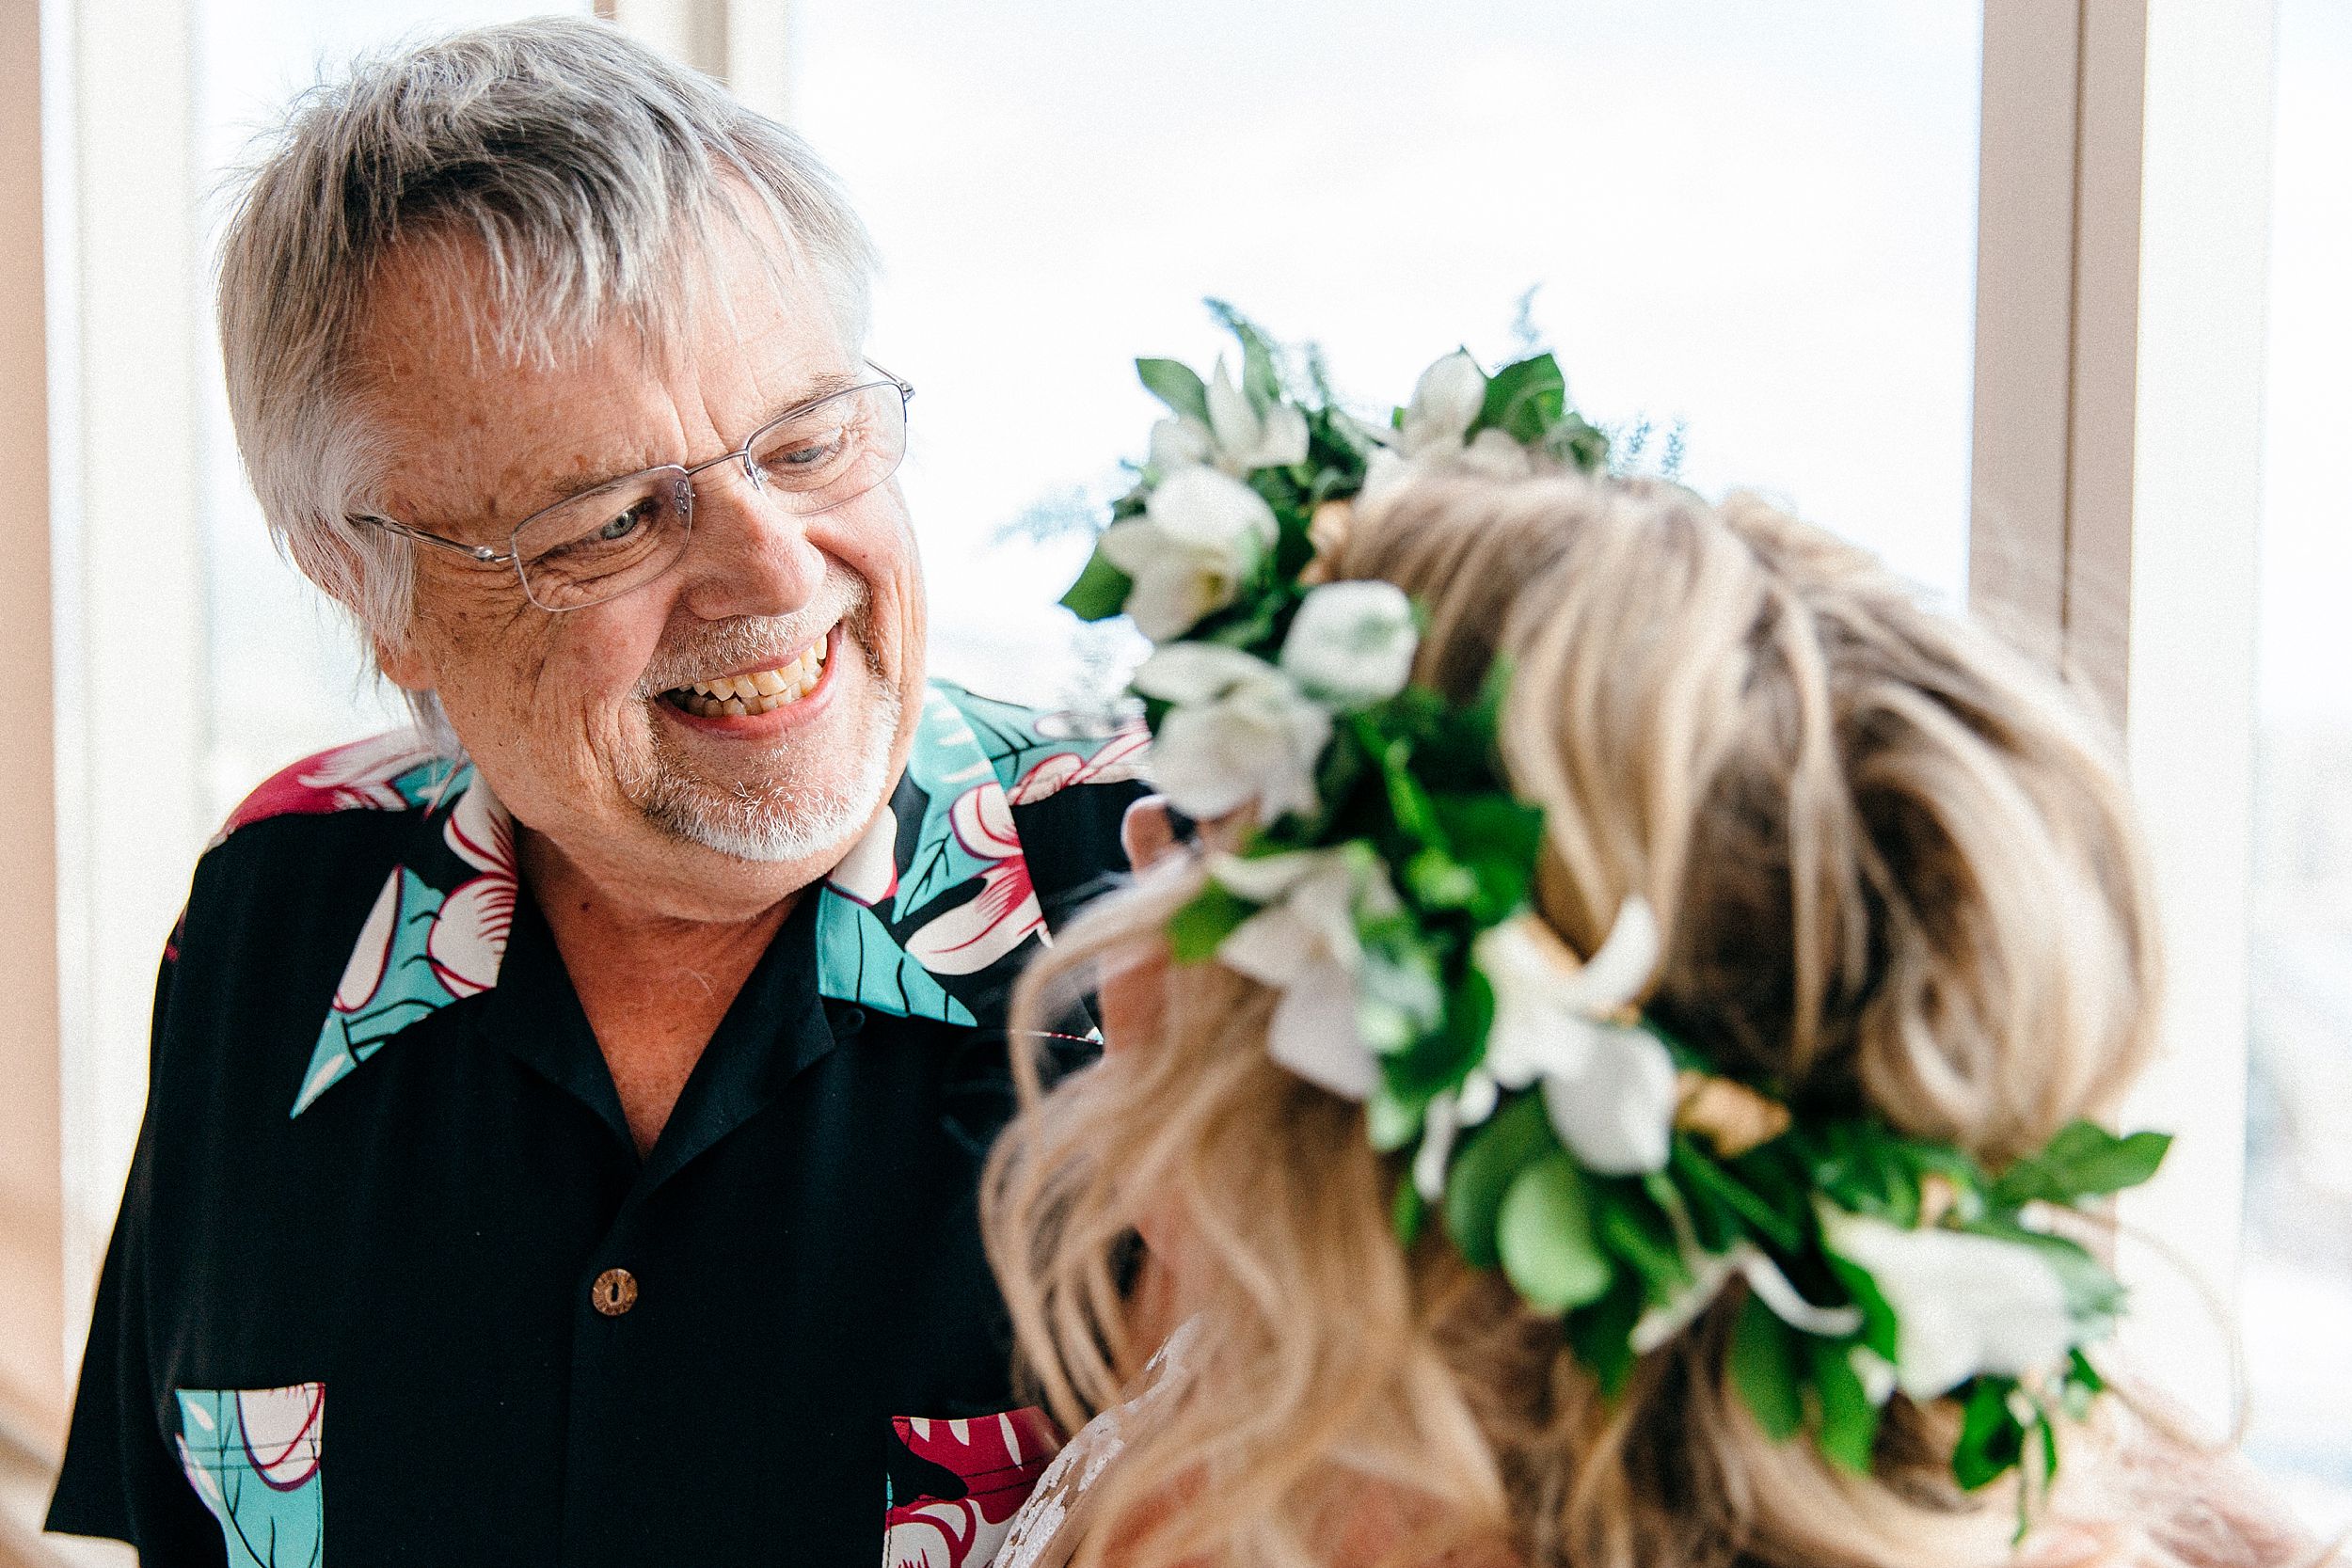 Dad sees daughter on her wedding day overlooking diamond head